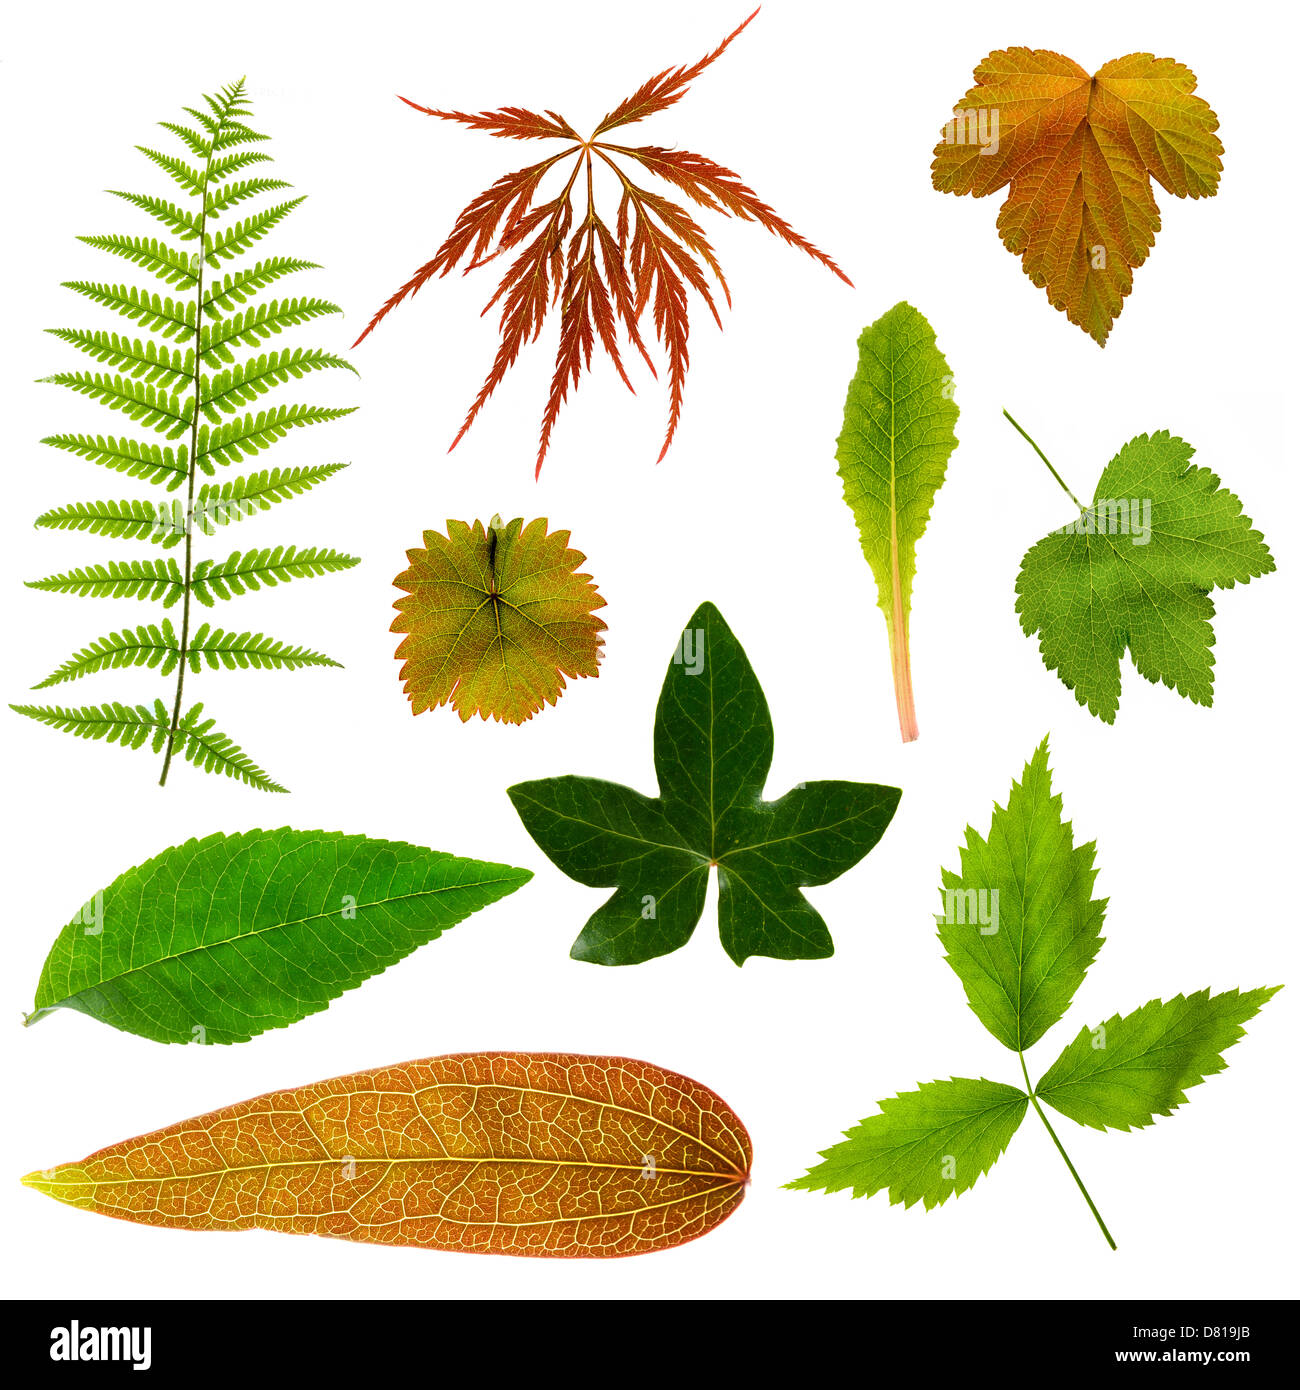 Collection of leaves on a white background Stock Photo